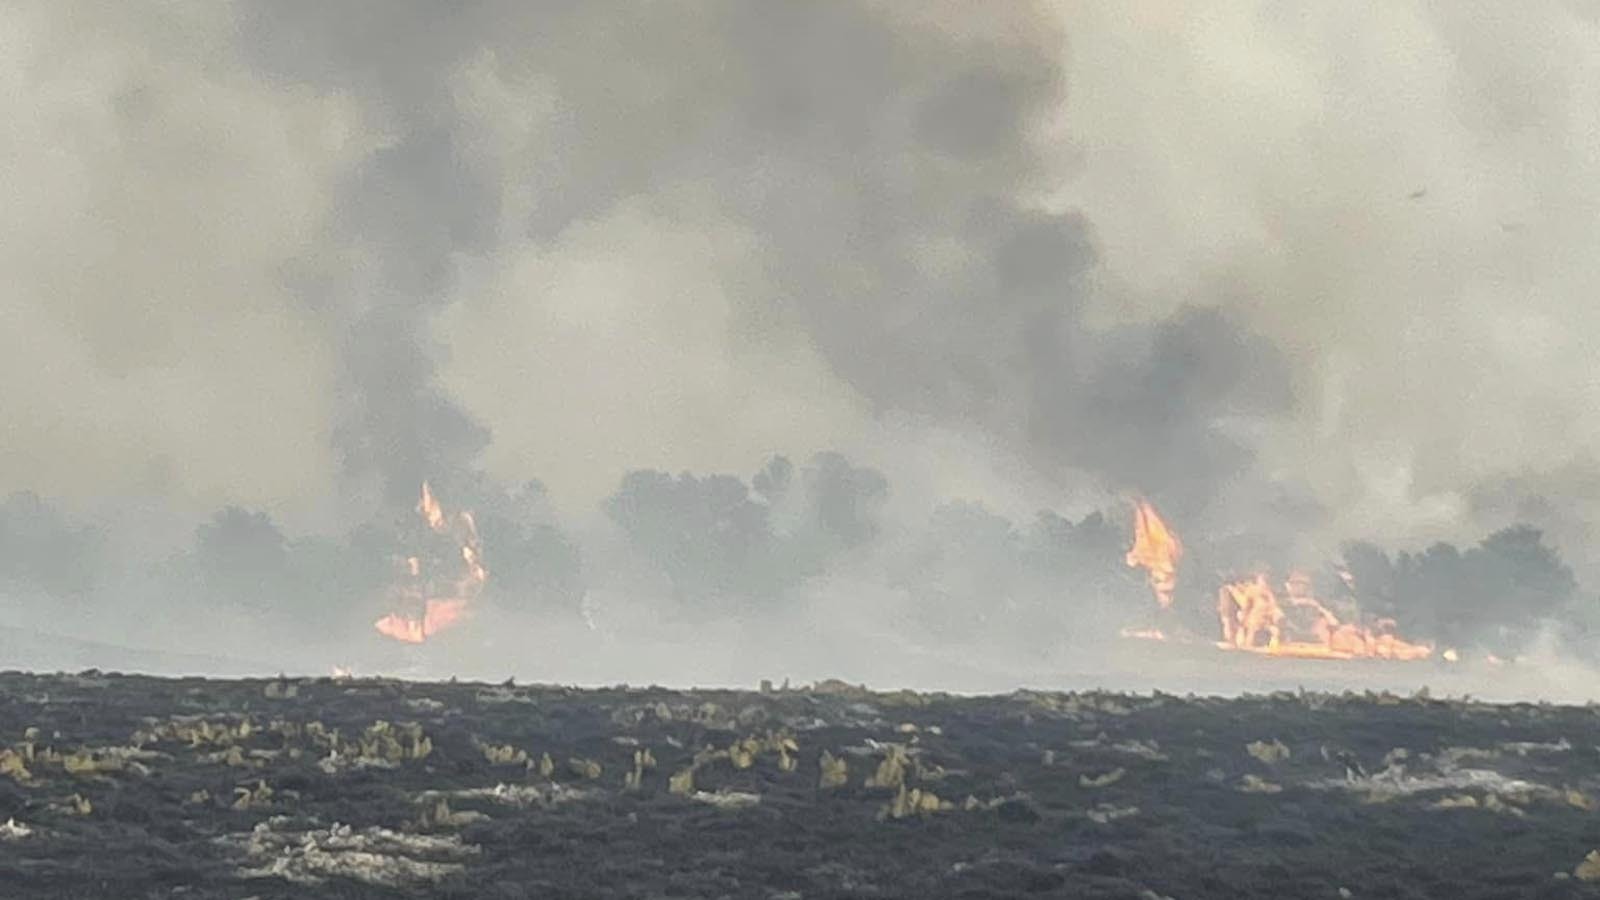 The Wildcat Creek Fire southeast of Wright, Wyoming, has burned more than 17,000 acres and is about 30% contained, fire officials report.